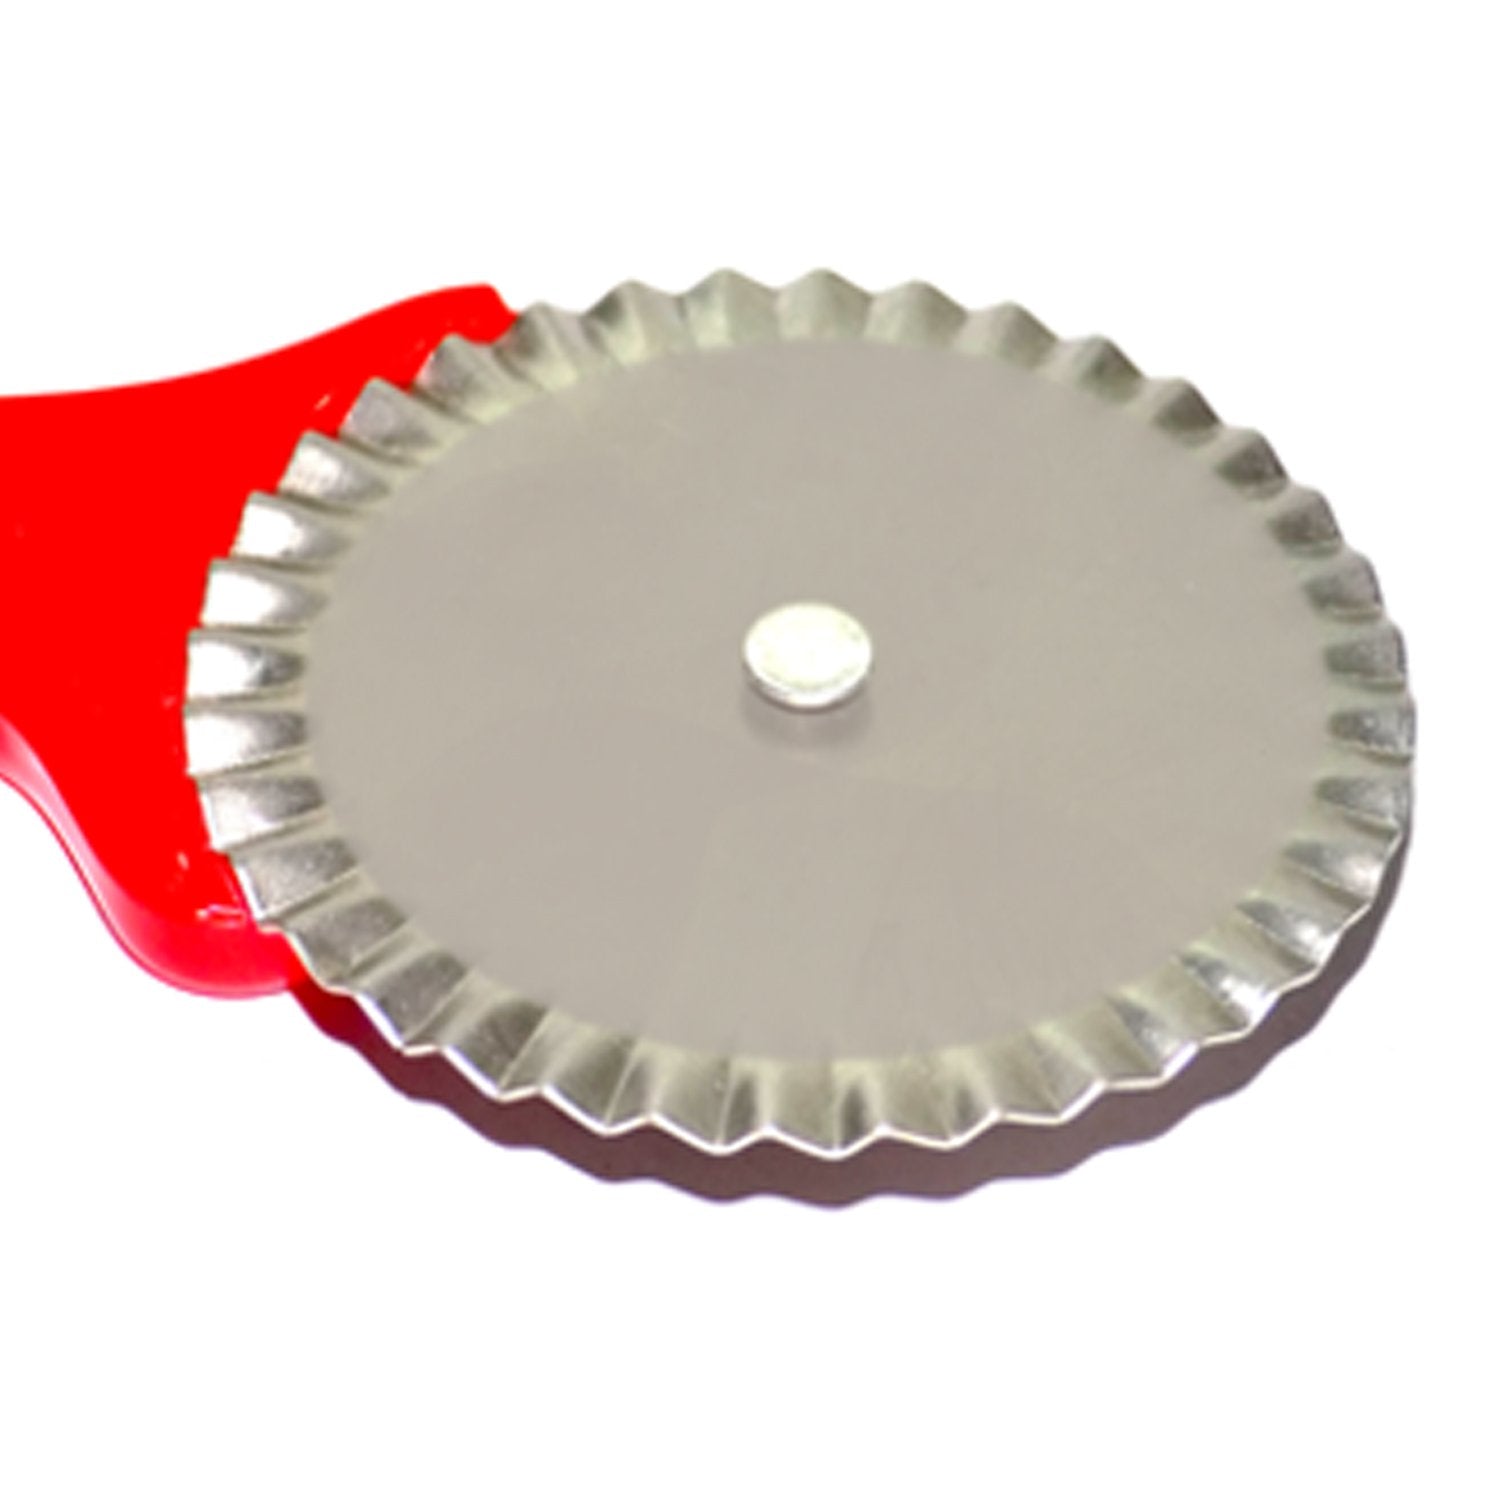 0725 Stainless Steel Pizza Cutter/Pastry Cutter/Sandwiches Cutter - SkyShopy